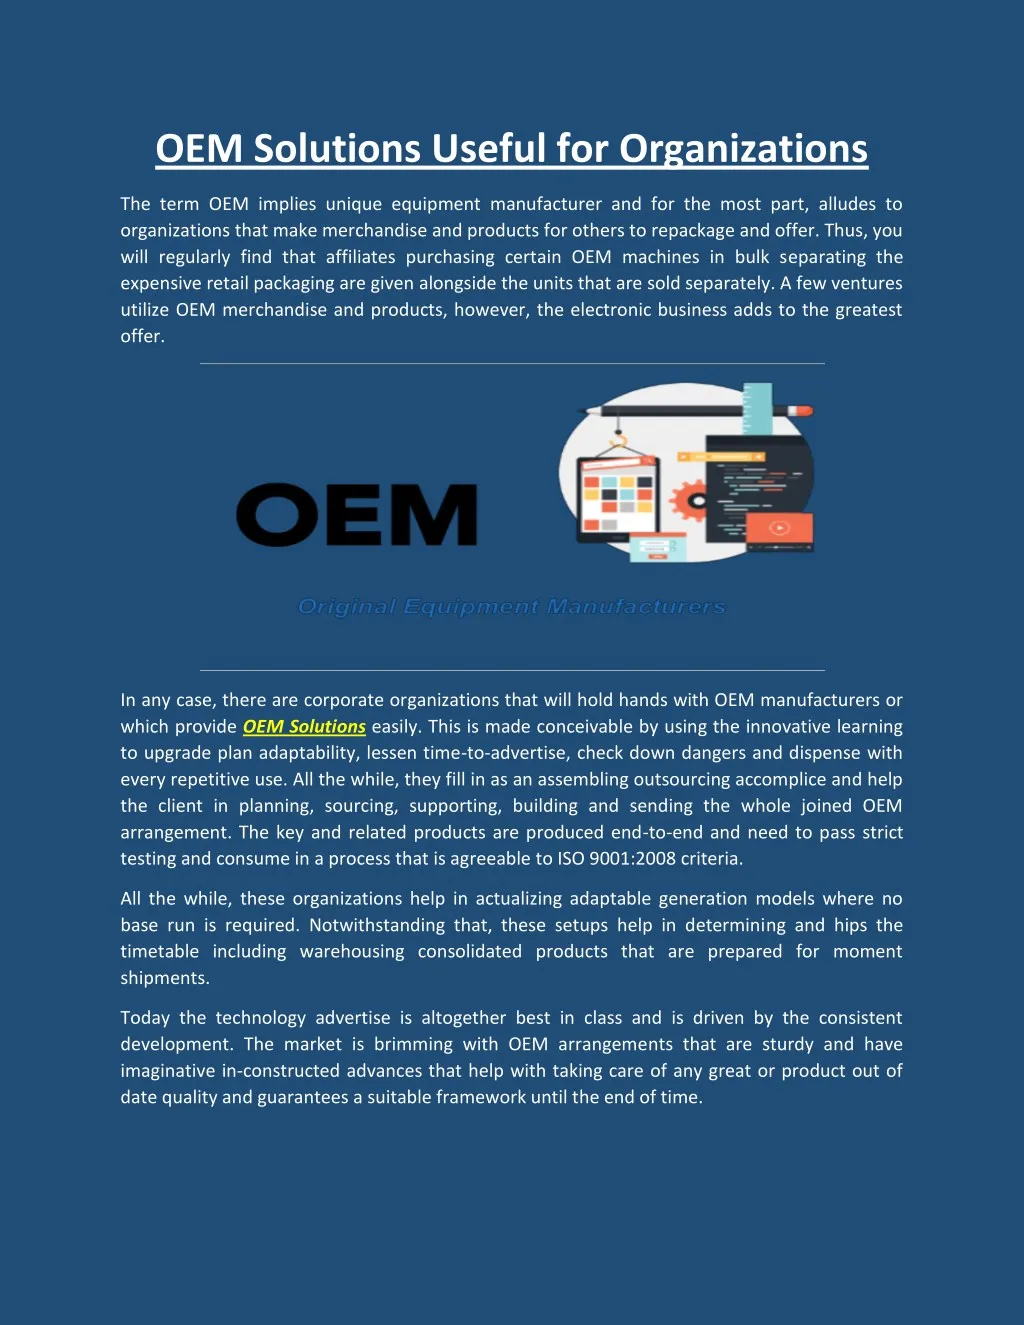 oem solutions useful for organizations